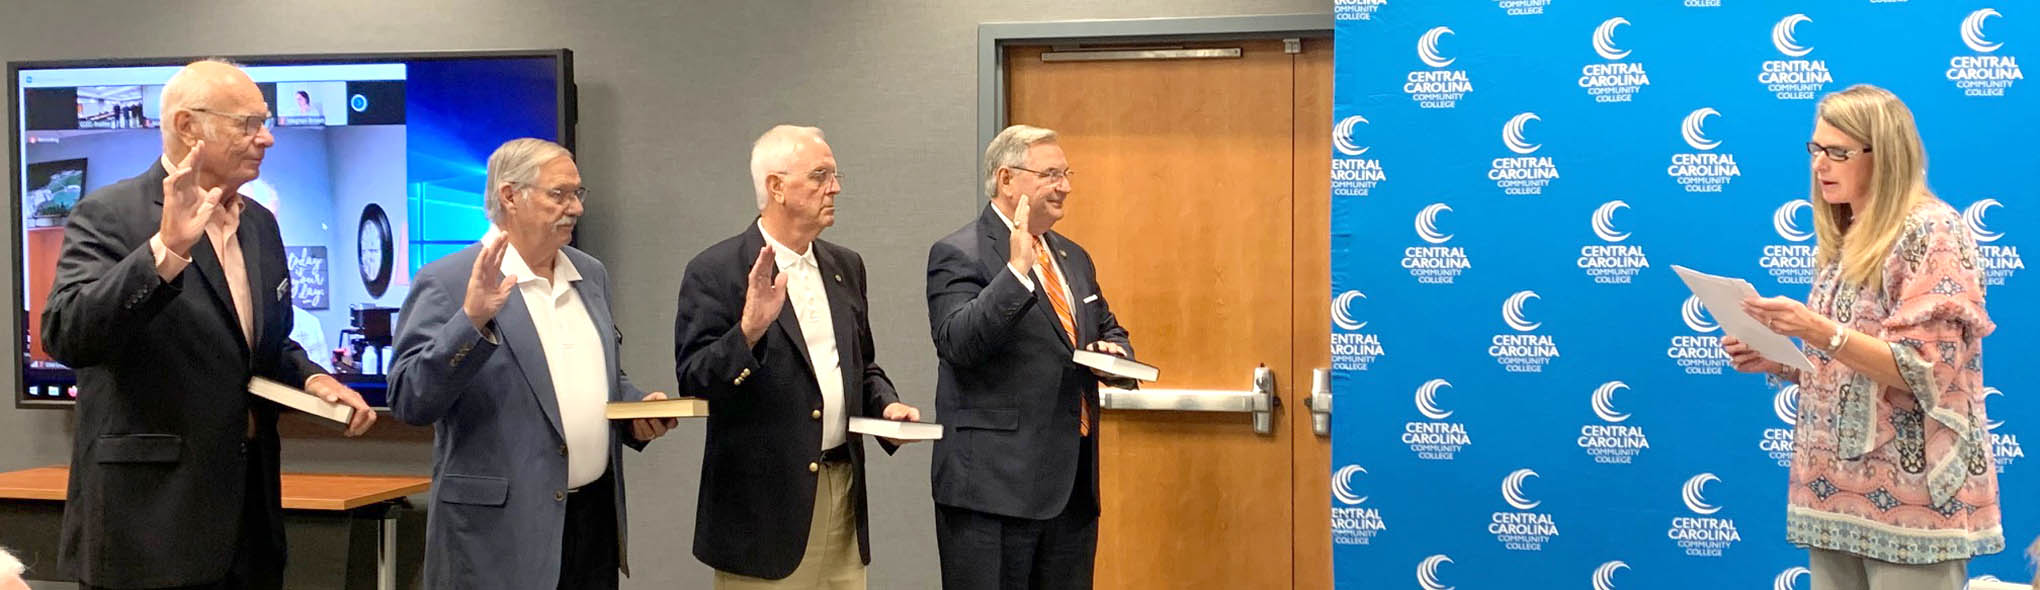 Click to enlarge,  Central Carolina Community College's reappointed Trustees were sworn in at the CCCC Board of Trustees' meeting on Wednesday, July 28. Susie K. Thomas (right), Clerk of Superior Court in Lee County, conducted the ceremony. Being sworn in were, left to right: Trustees George Lucier, Bill Tatum, Gordon Springle, and Jim Burgin. 